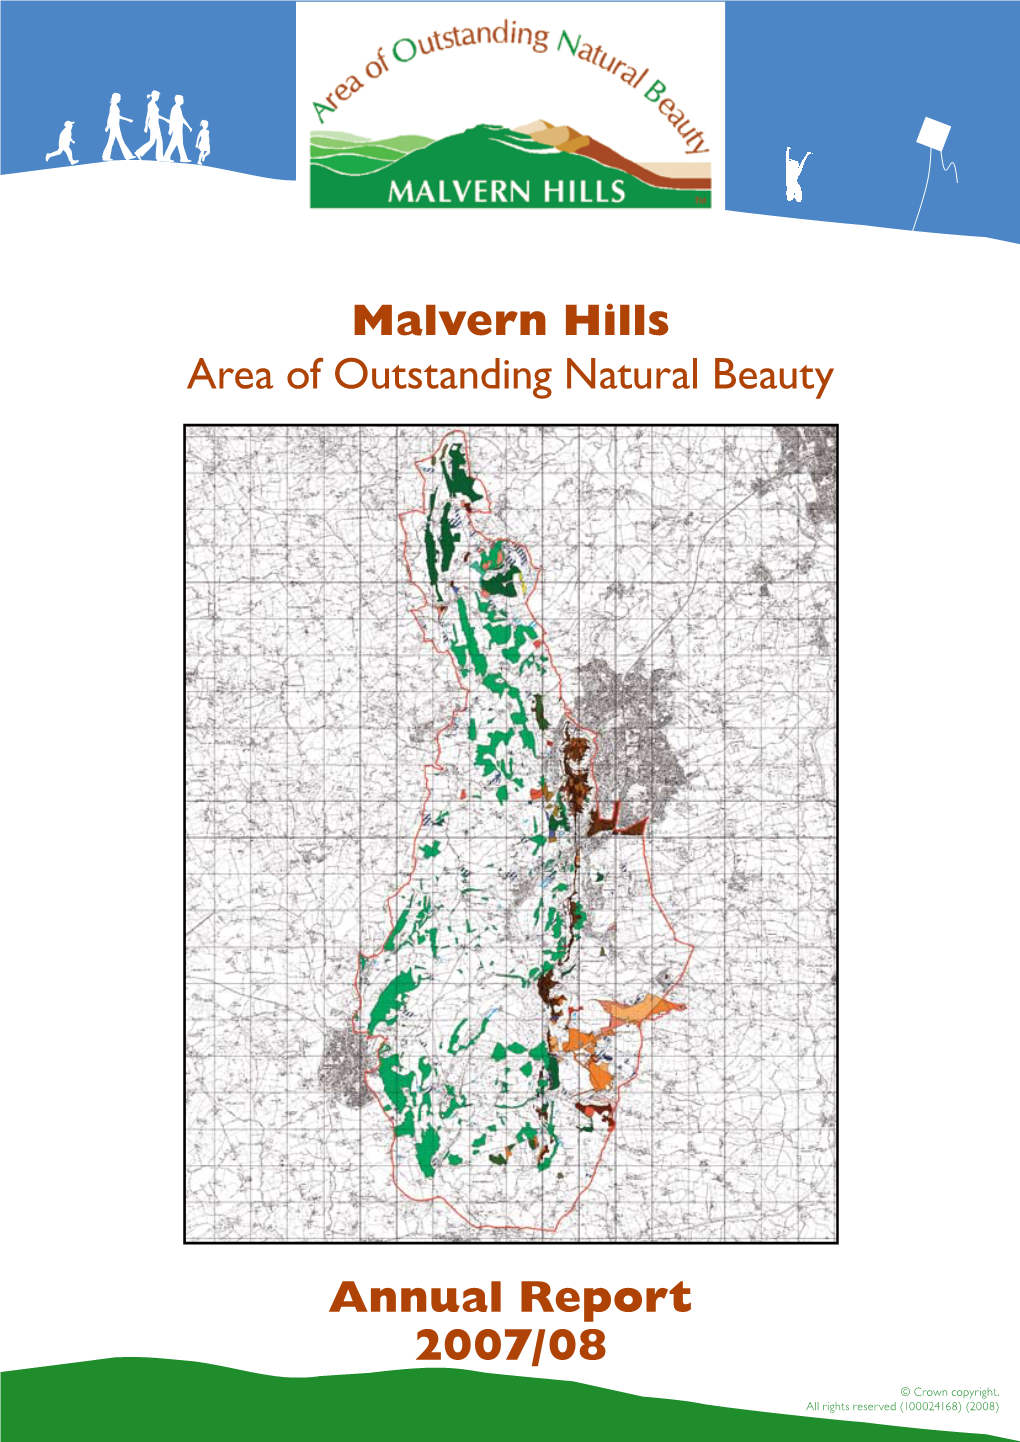 Malvern Hills Area of Outstanding Natural Beauty Annual Report 2007